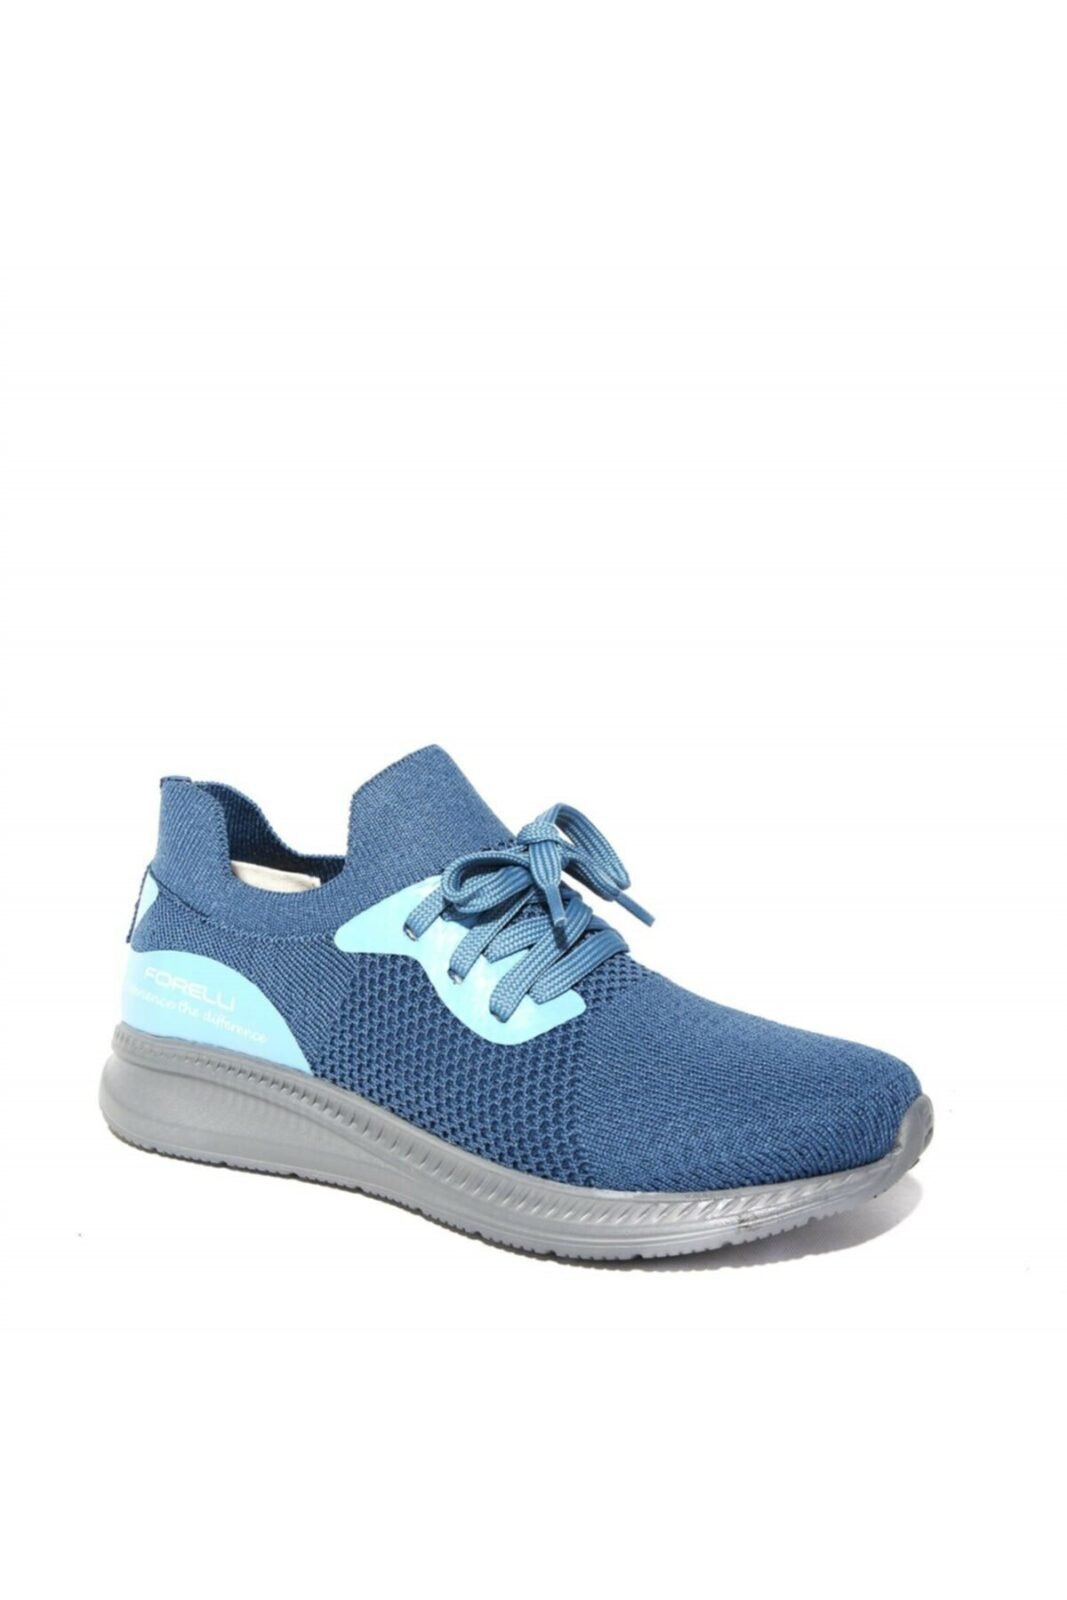 Forelli Walking Shoes - Blue